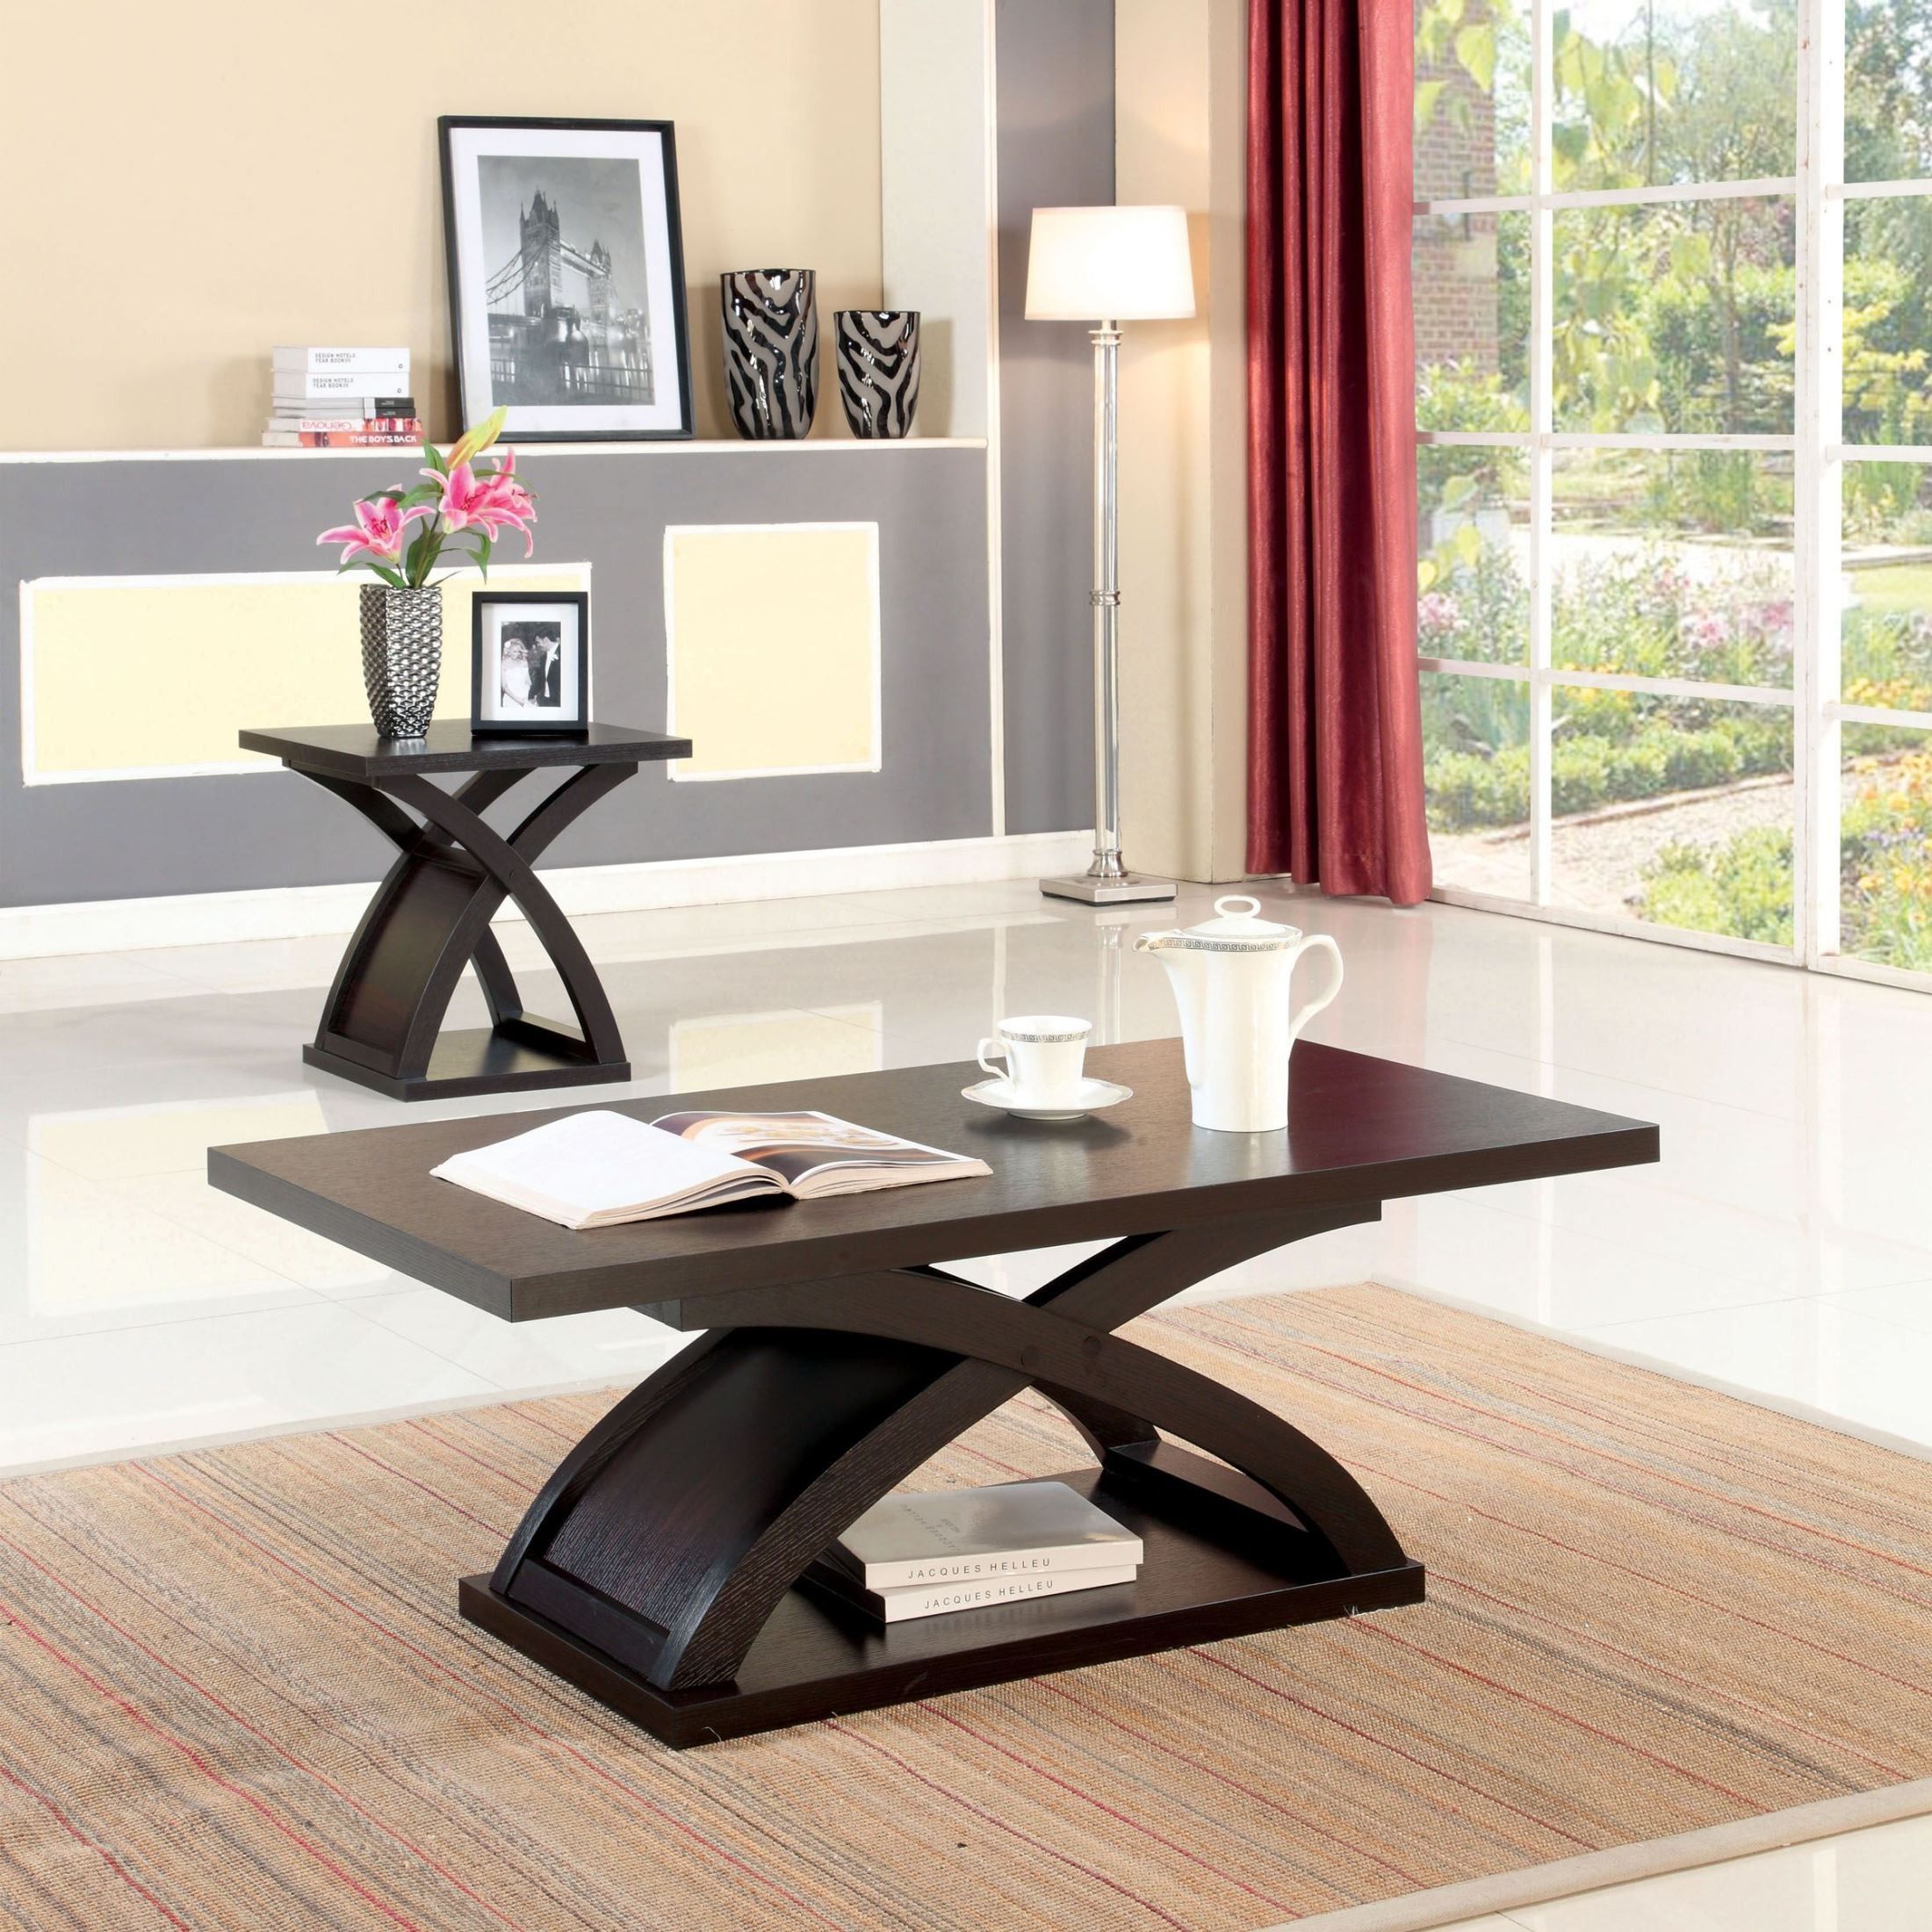 Arkley Espresso Rectangular Coffee Table From Furniture Of America Regarding Espresso Wood Finish Coffee Tables (View 21 of 21)